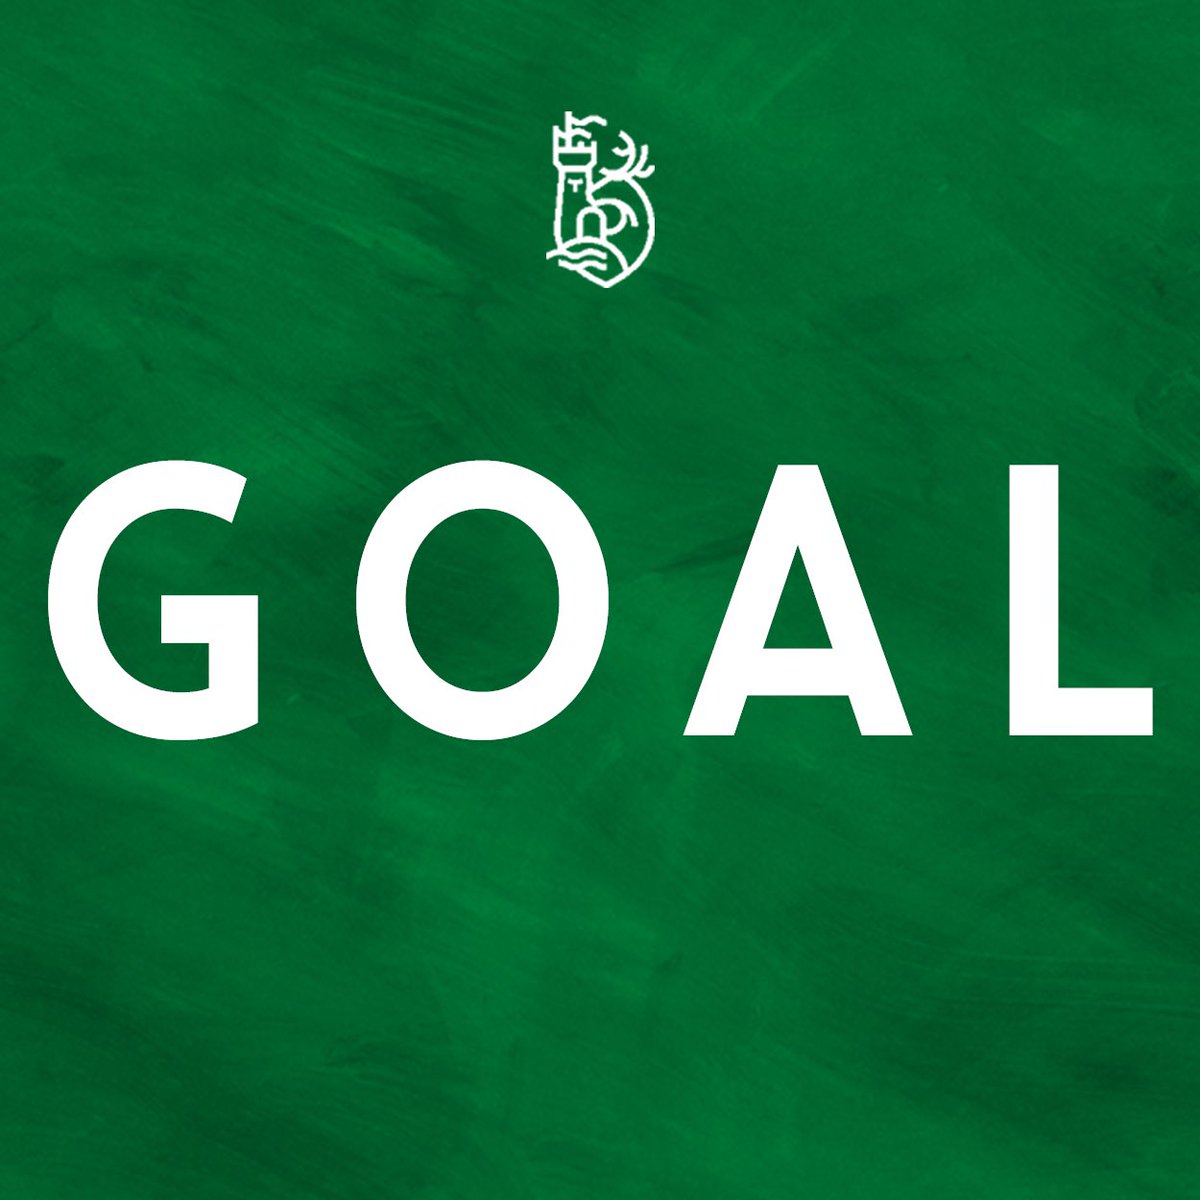 Mary I 0-3 UL 48’ DYLAN MORIARTY